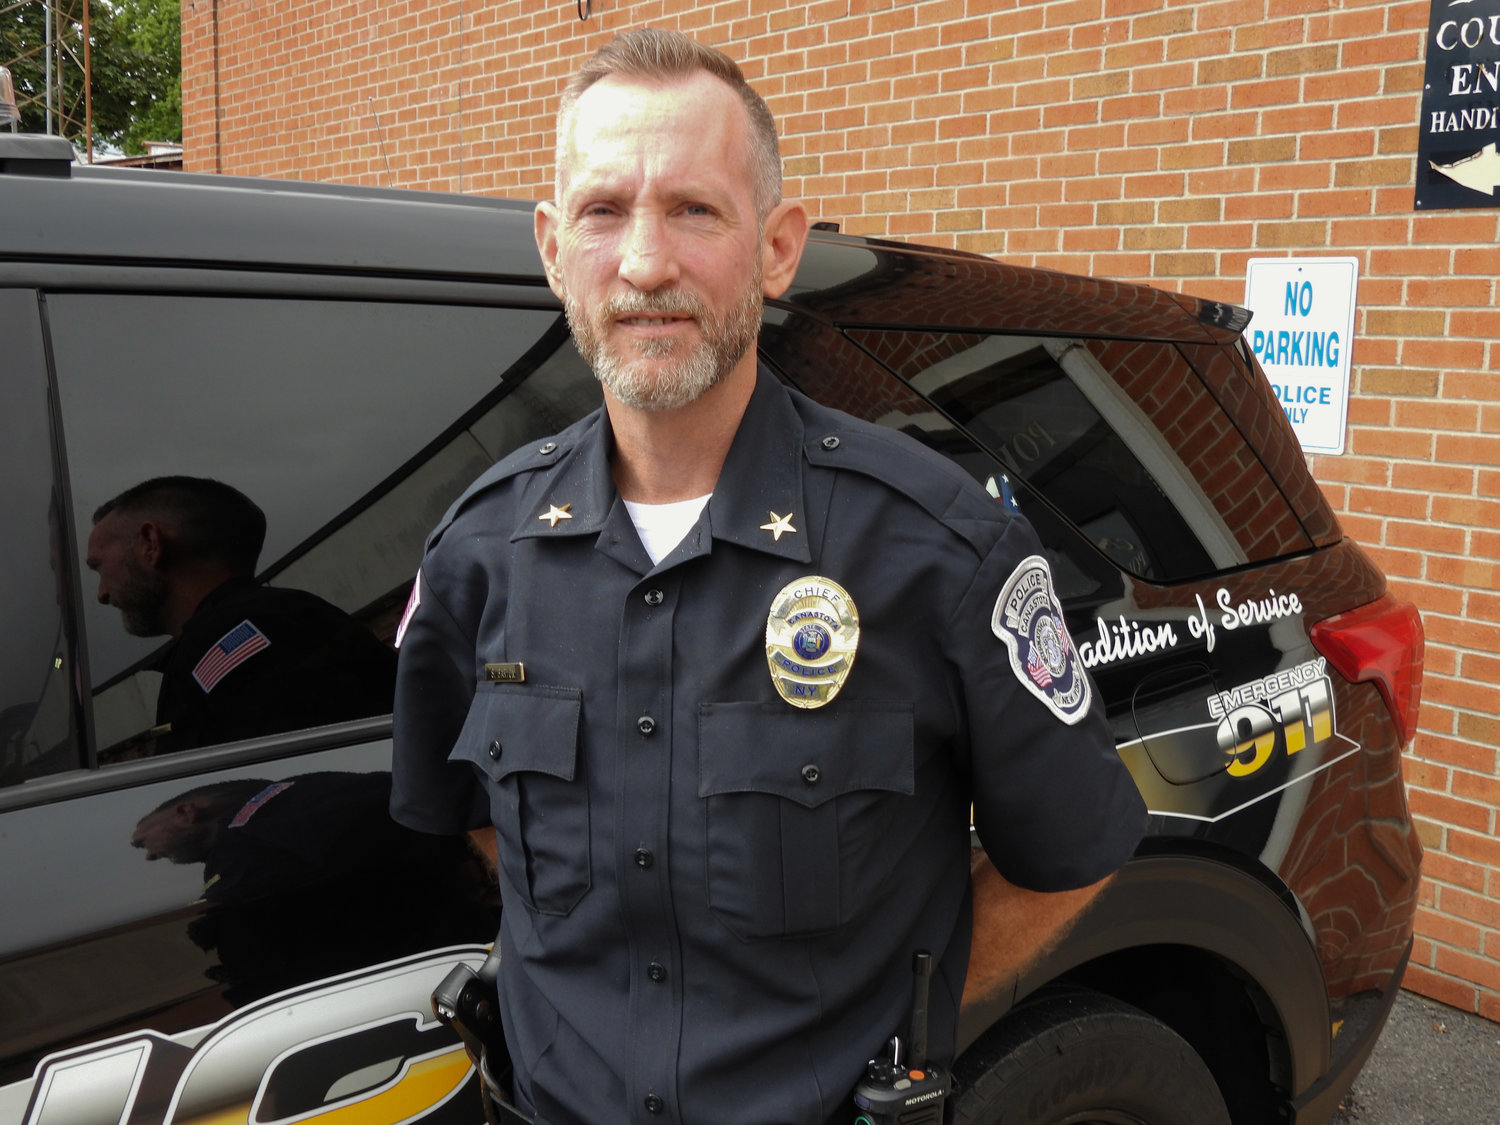 Canastota Police Chief Sean Barton believes in a community-involved police force and a larger focus on children’s focus and well-being. The chief was officially appointed on Aug. 16 and has served as officer-in-charge since July 2021.